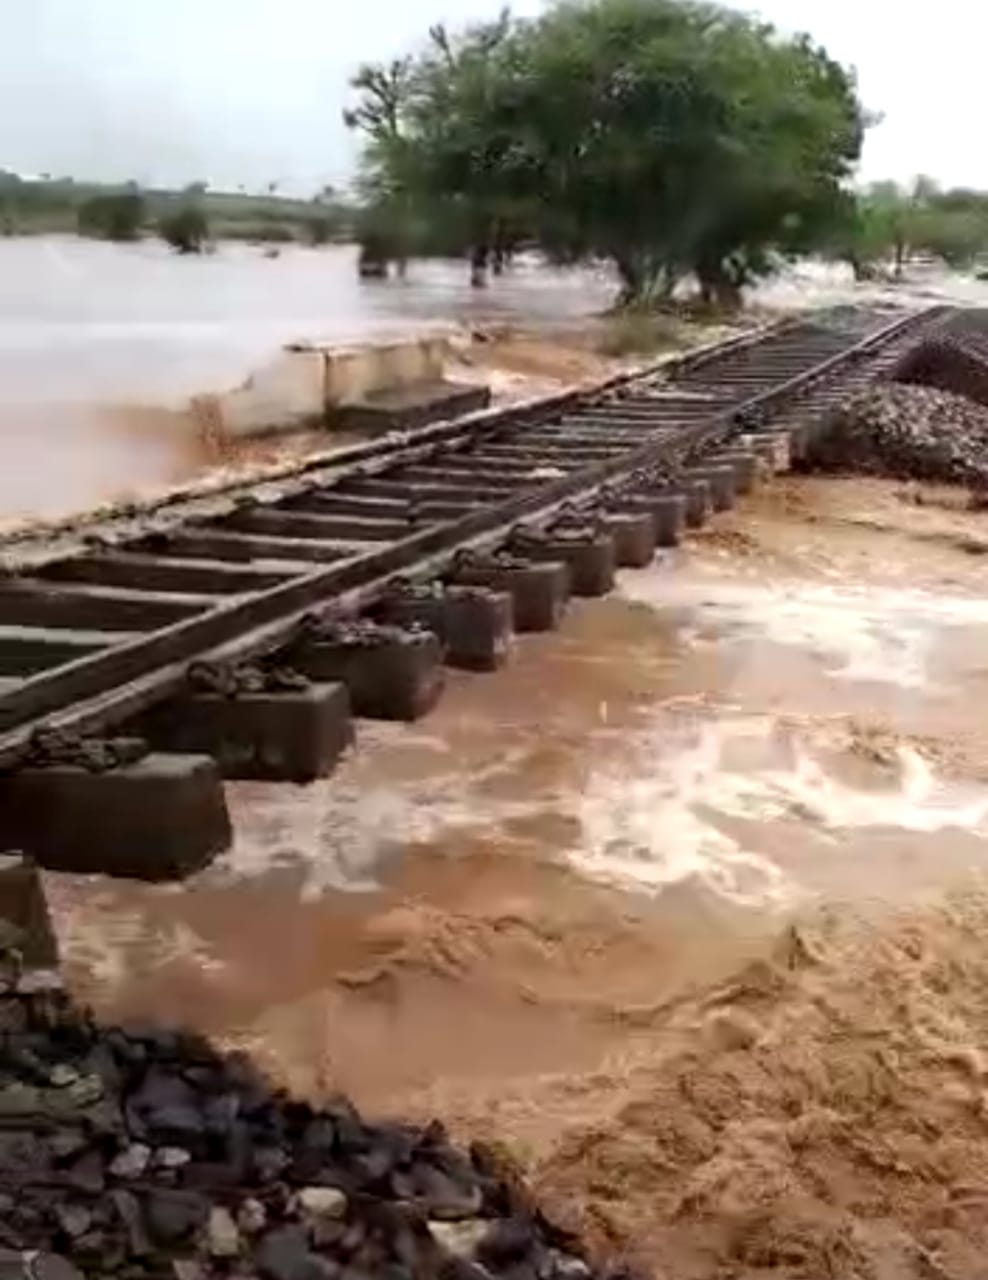 rail-service-disrupted-due-to-soil-erosion-from-the-track-in-heavy-rain